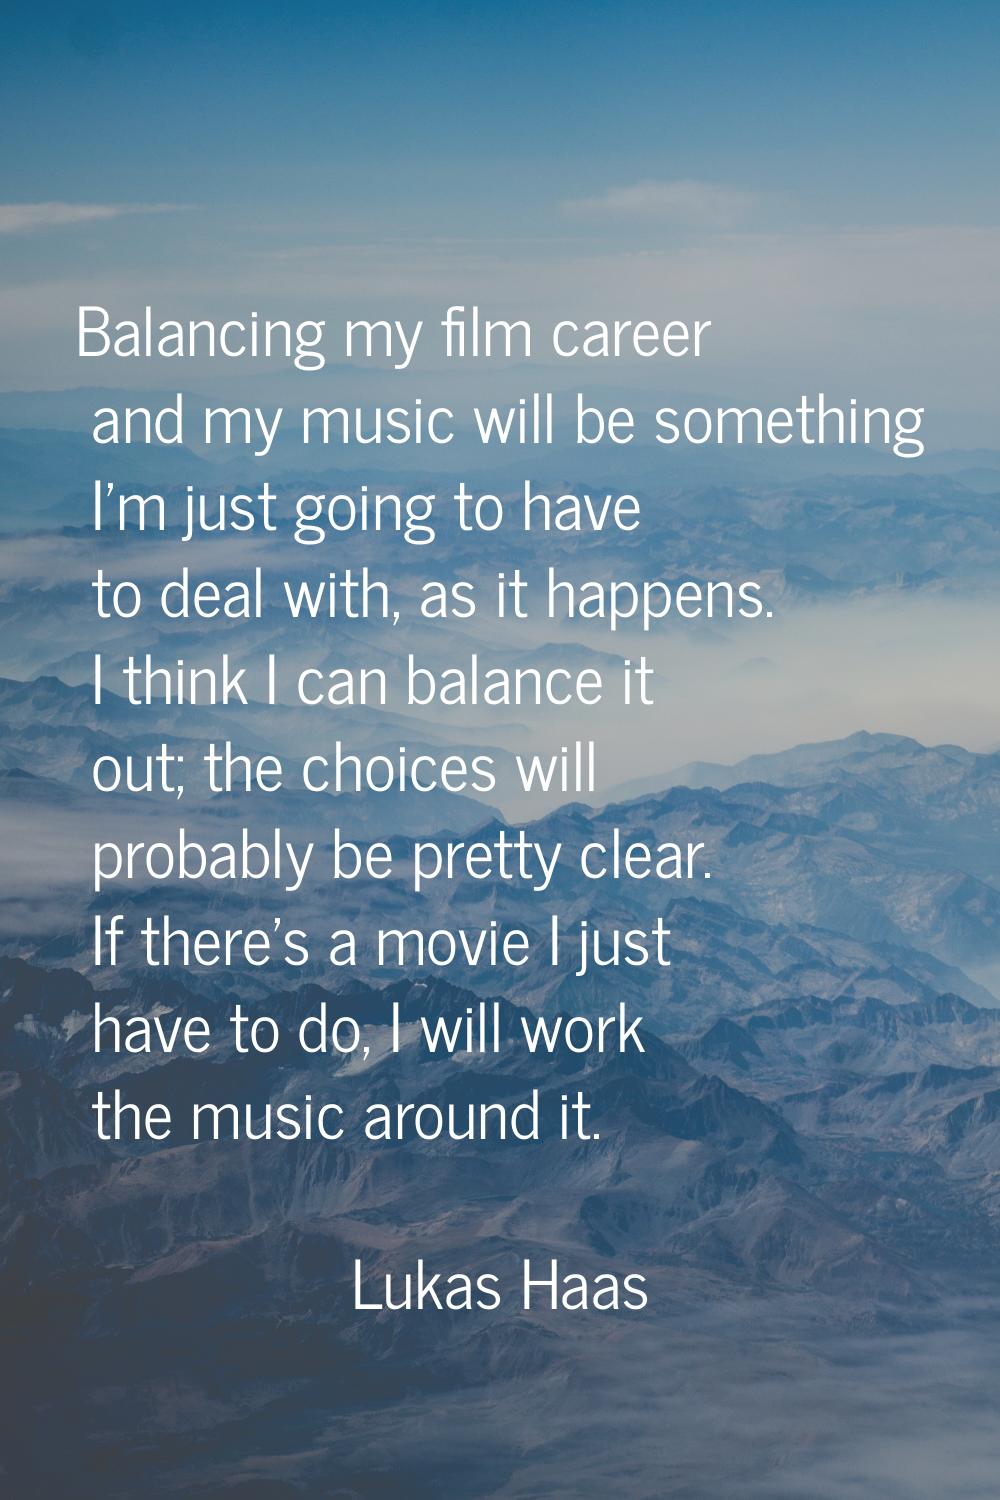 Balancing my film career and my music will be something I'm just going to have to deal with, as it 